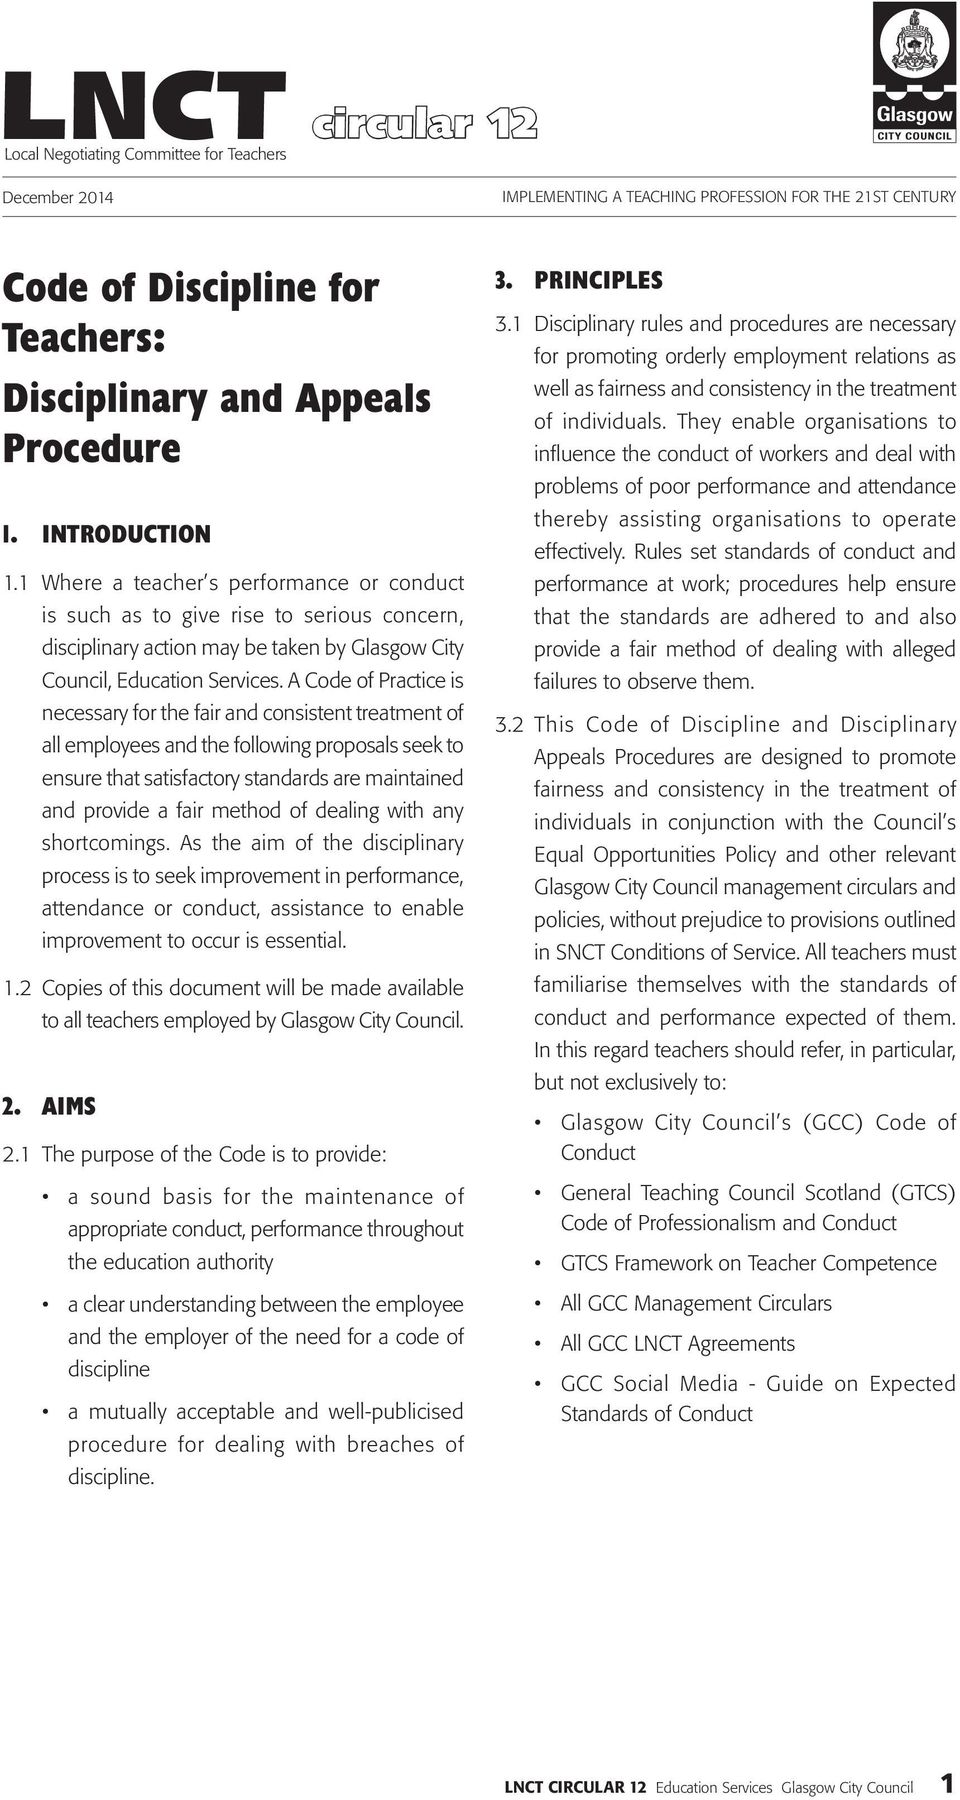 A Code of Practice is necessary for the fair and consistent treatment of all employees and the following proposals seek to ensure that satisfactory standards are maintained and provide a fair method